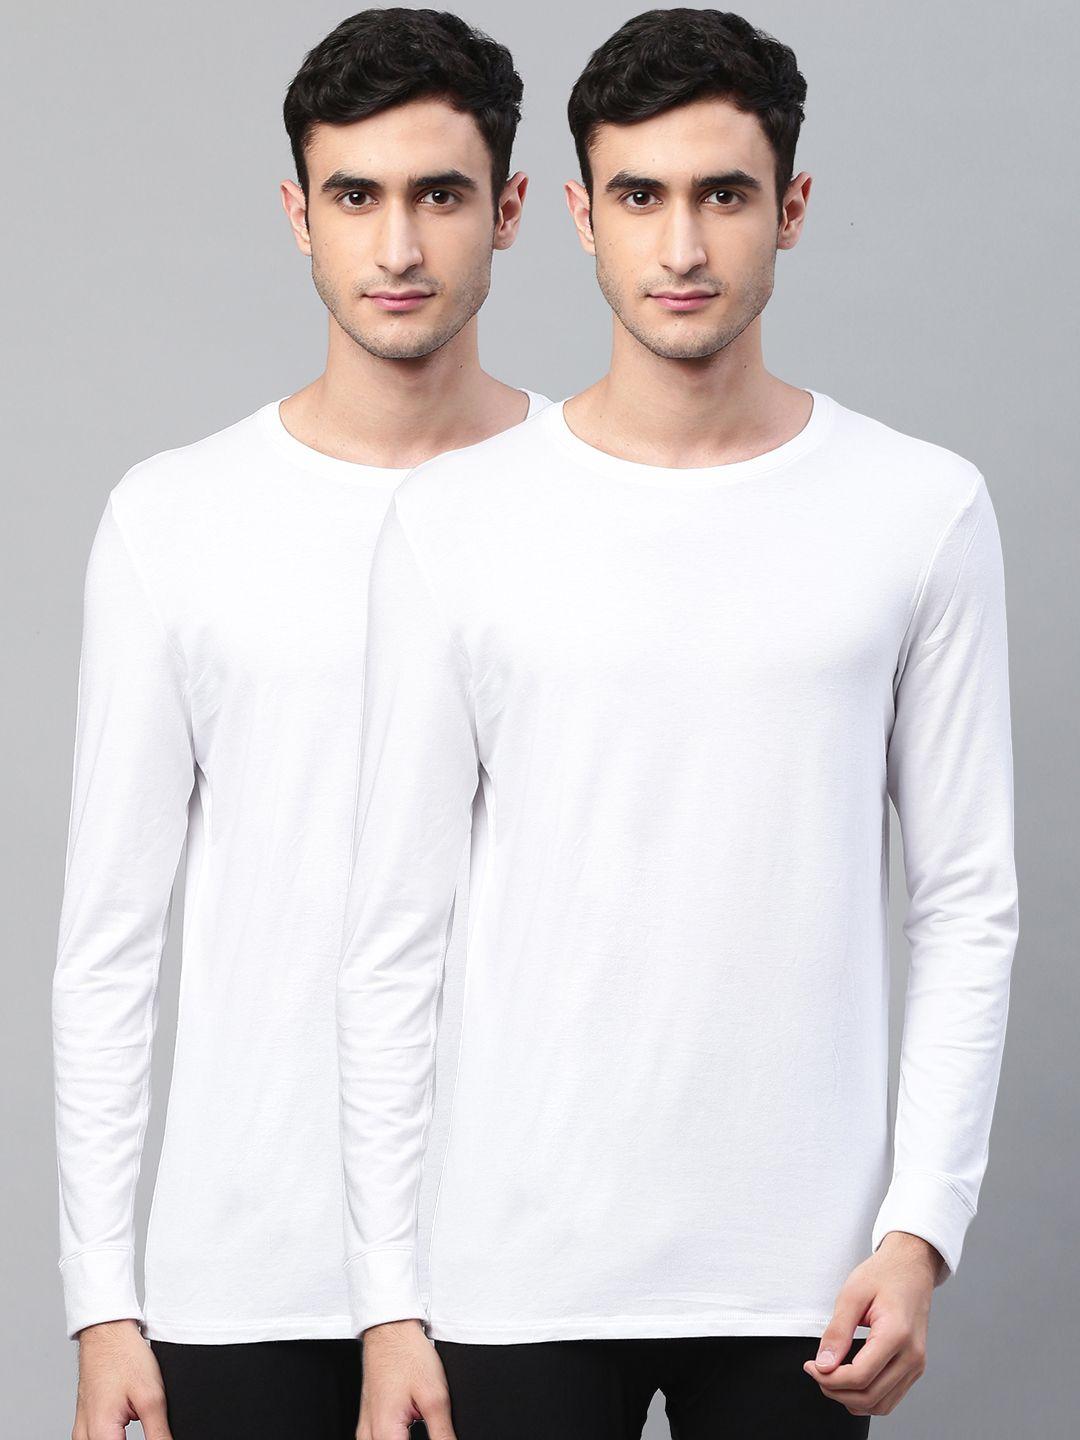 marks & spencer men pack of 2 white solid thermal t-shirts